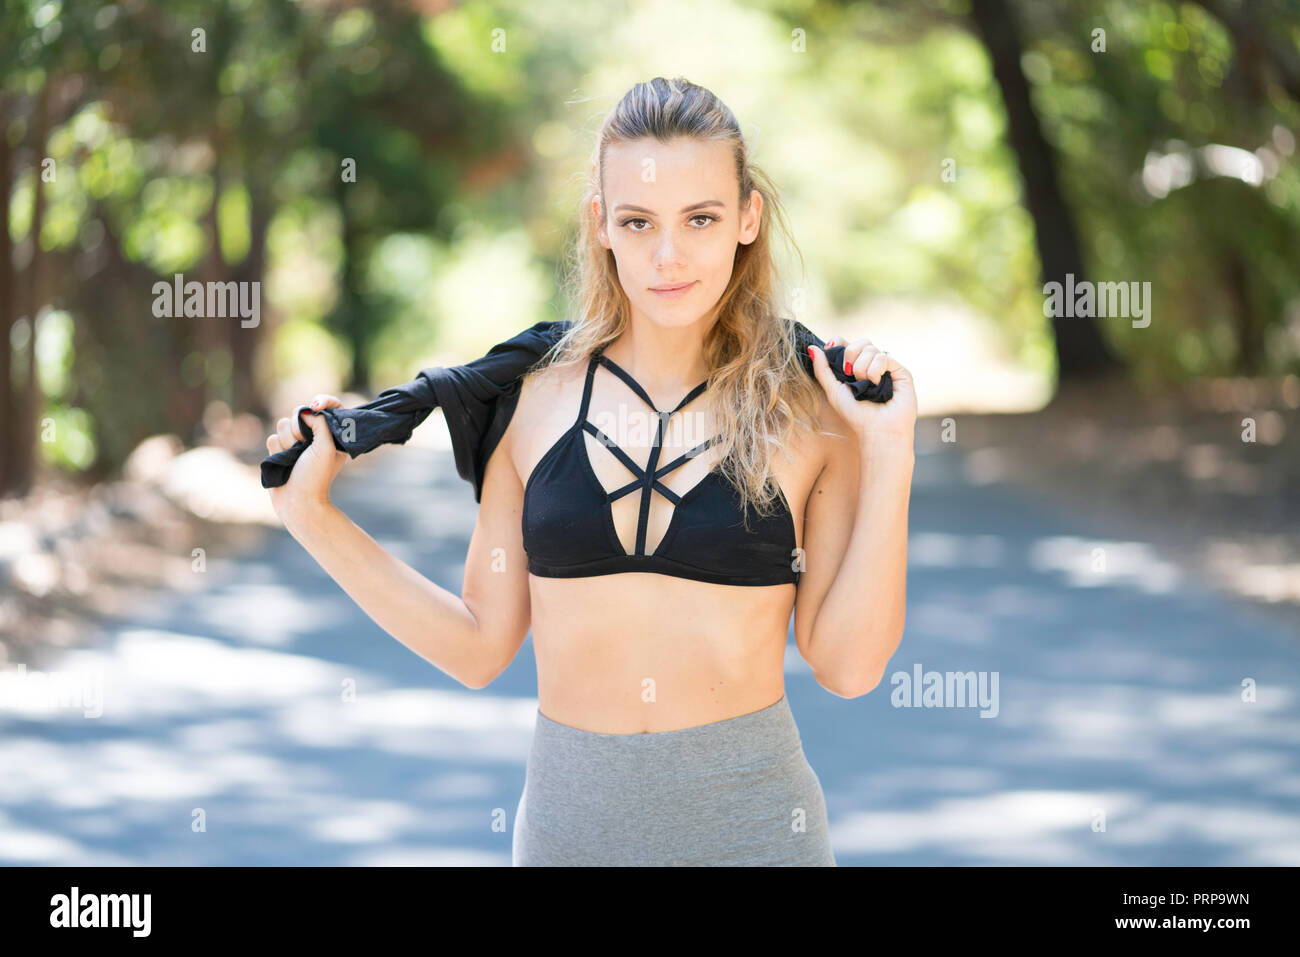 Young fit woman in sports bra and workout pants, wearing boxing